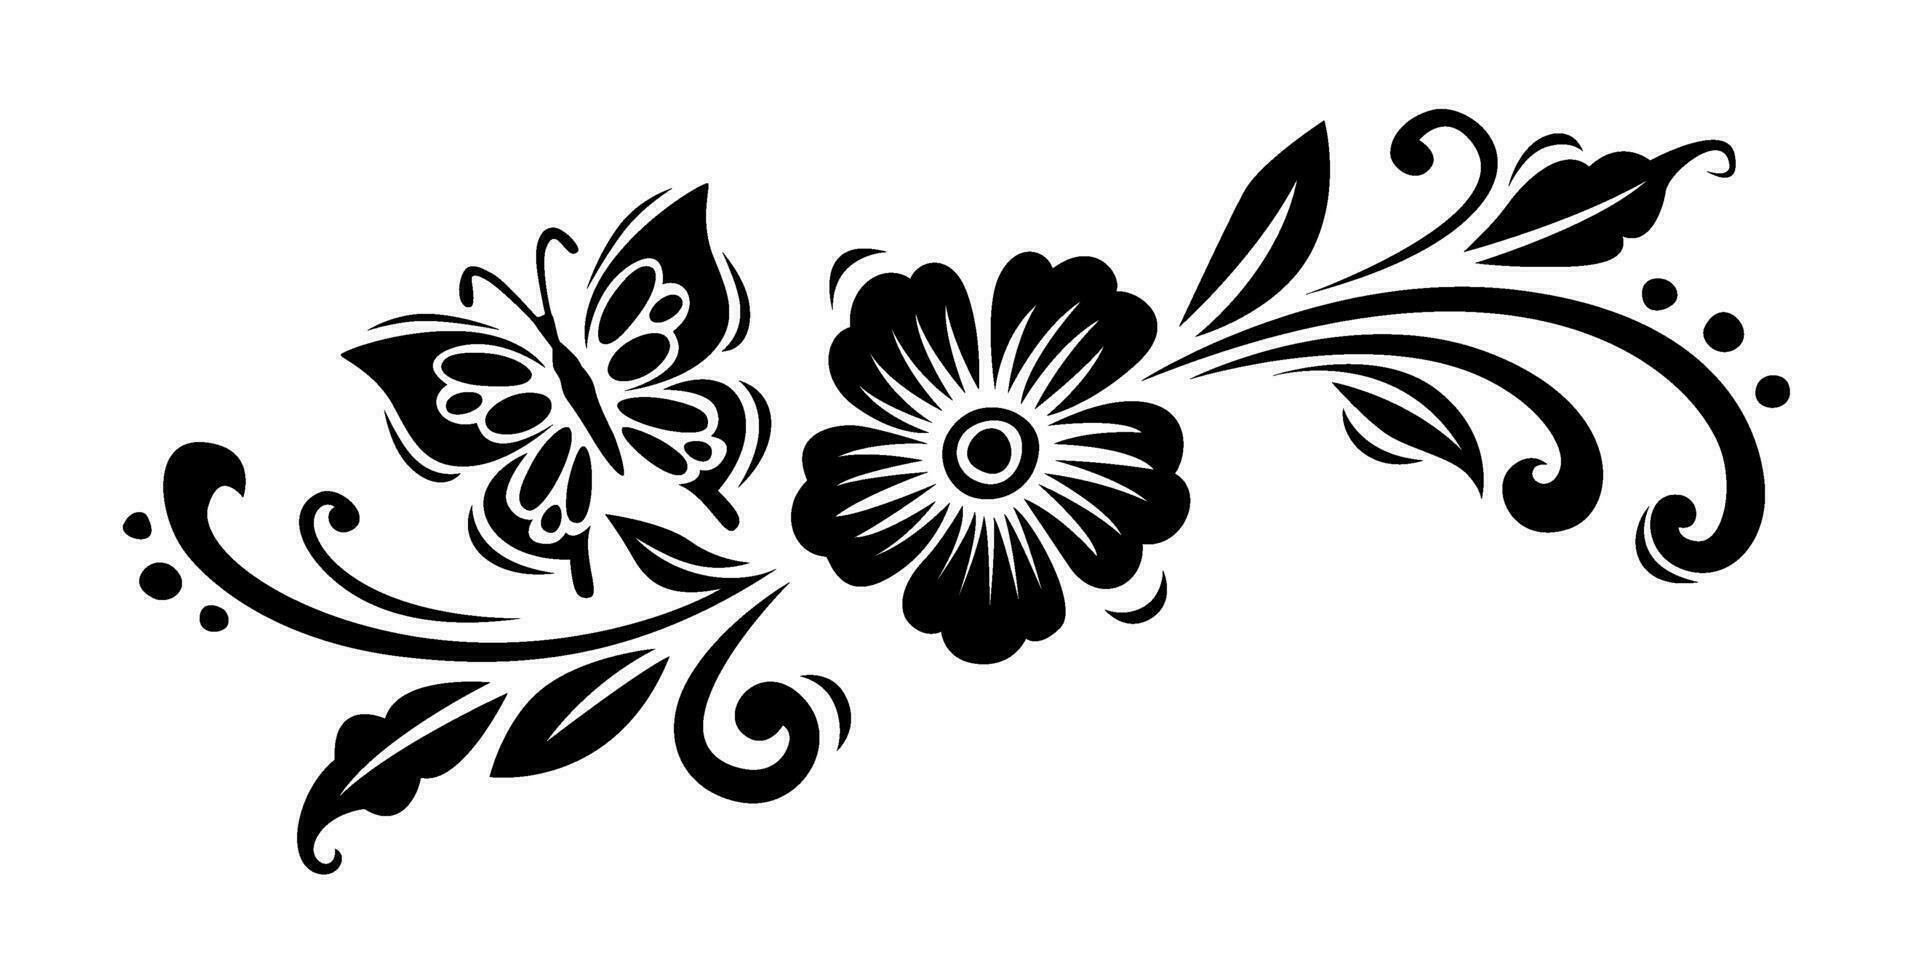 Black stylized floral pattern with a butterfly on a white background. vector